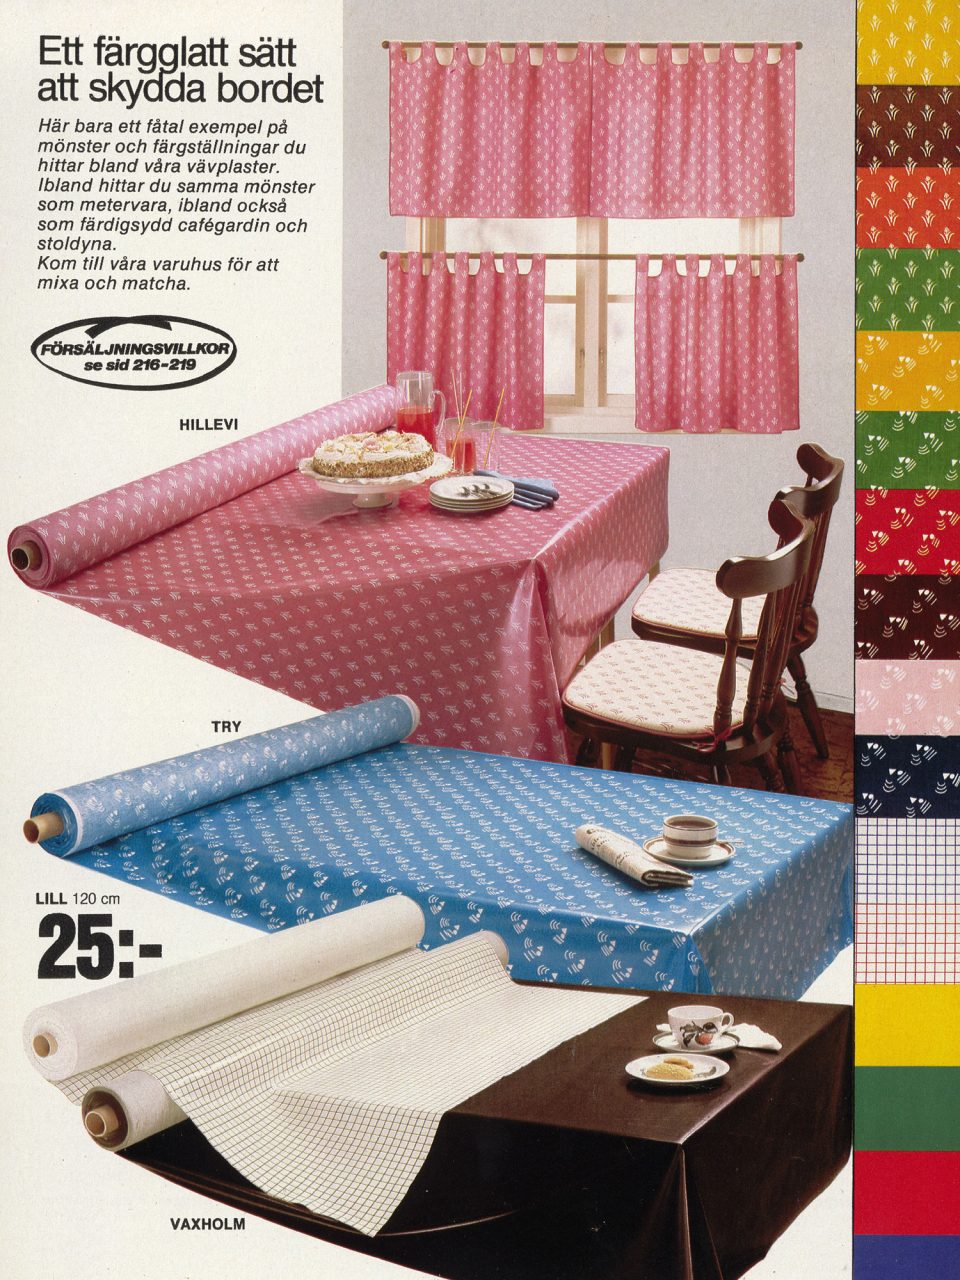 1980 IKEA catalogue page displaying colourful wax cloths and curtains with white patterns.